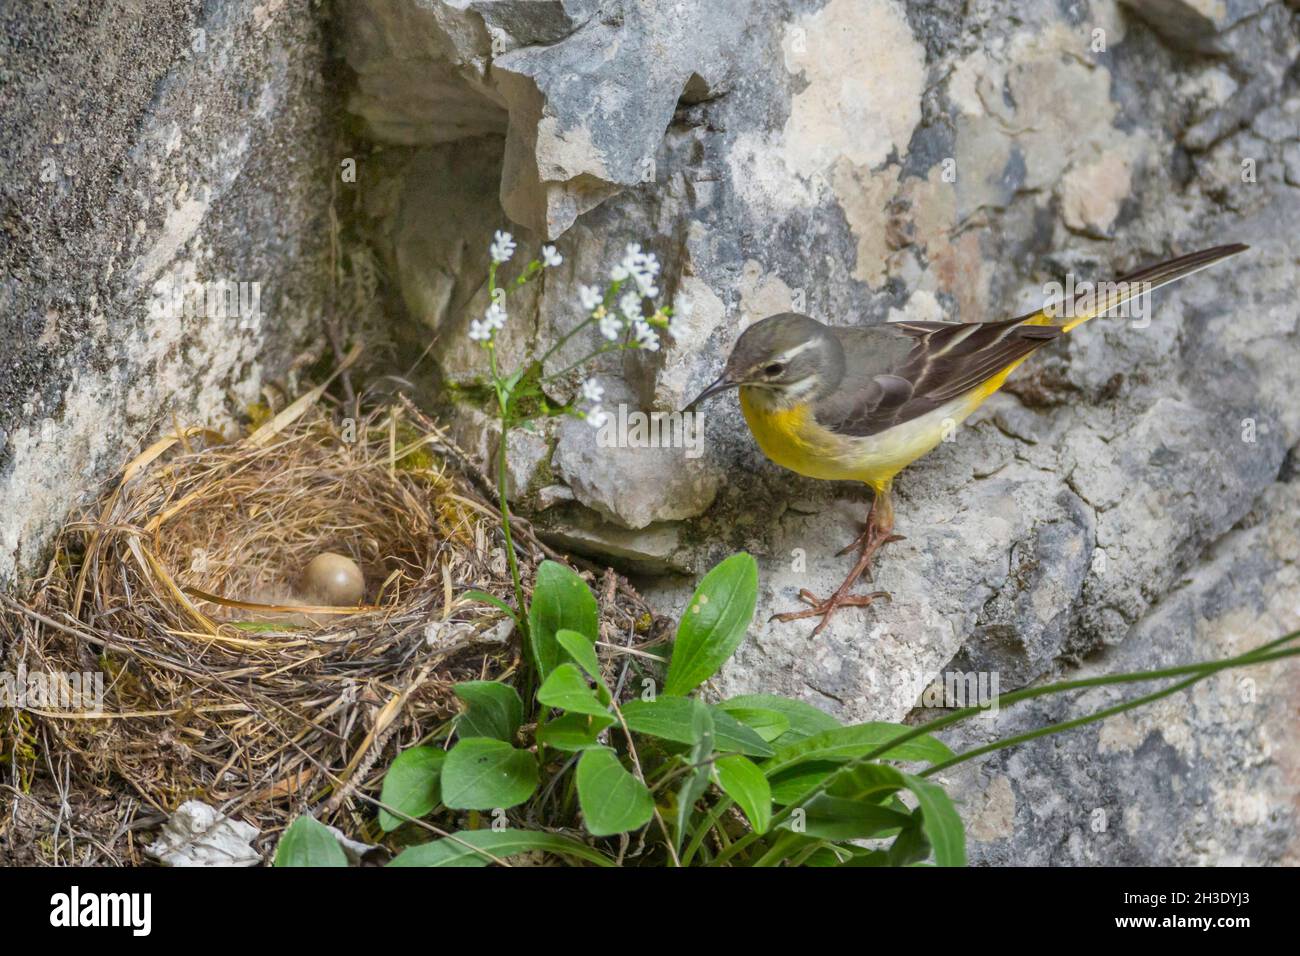 grey wagtail (Motacilla cinerea), female layed an egg into the nest at a rock wall, Germany Stock Photo